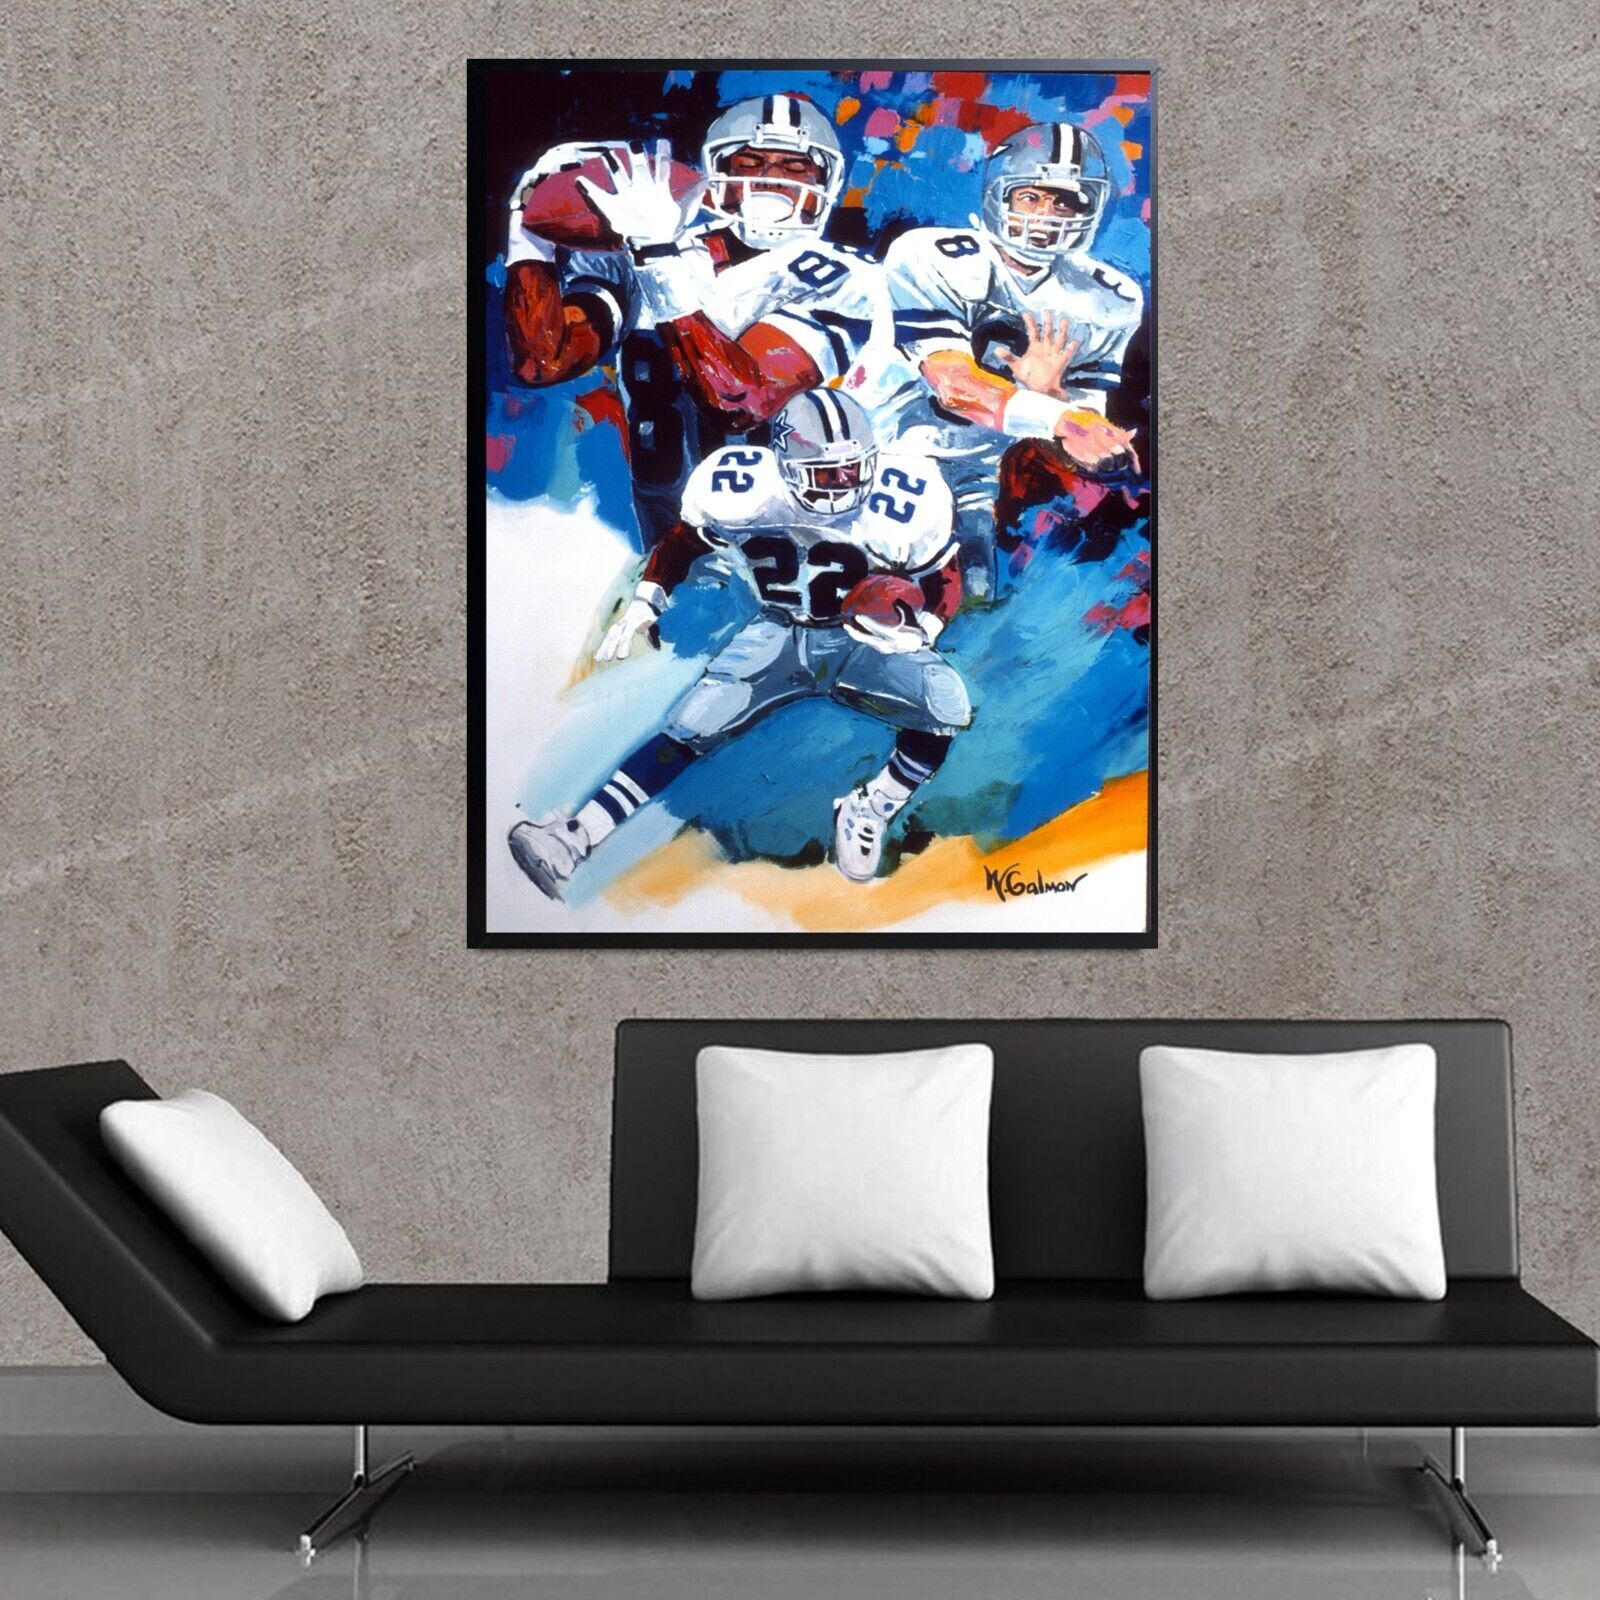 Sale Aikman Smith Irvin Cowboys Textured 36H X 24W Canvas Framed Was 795 Now 245